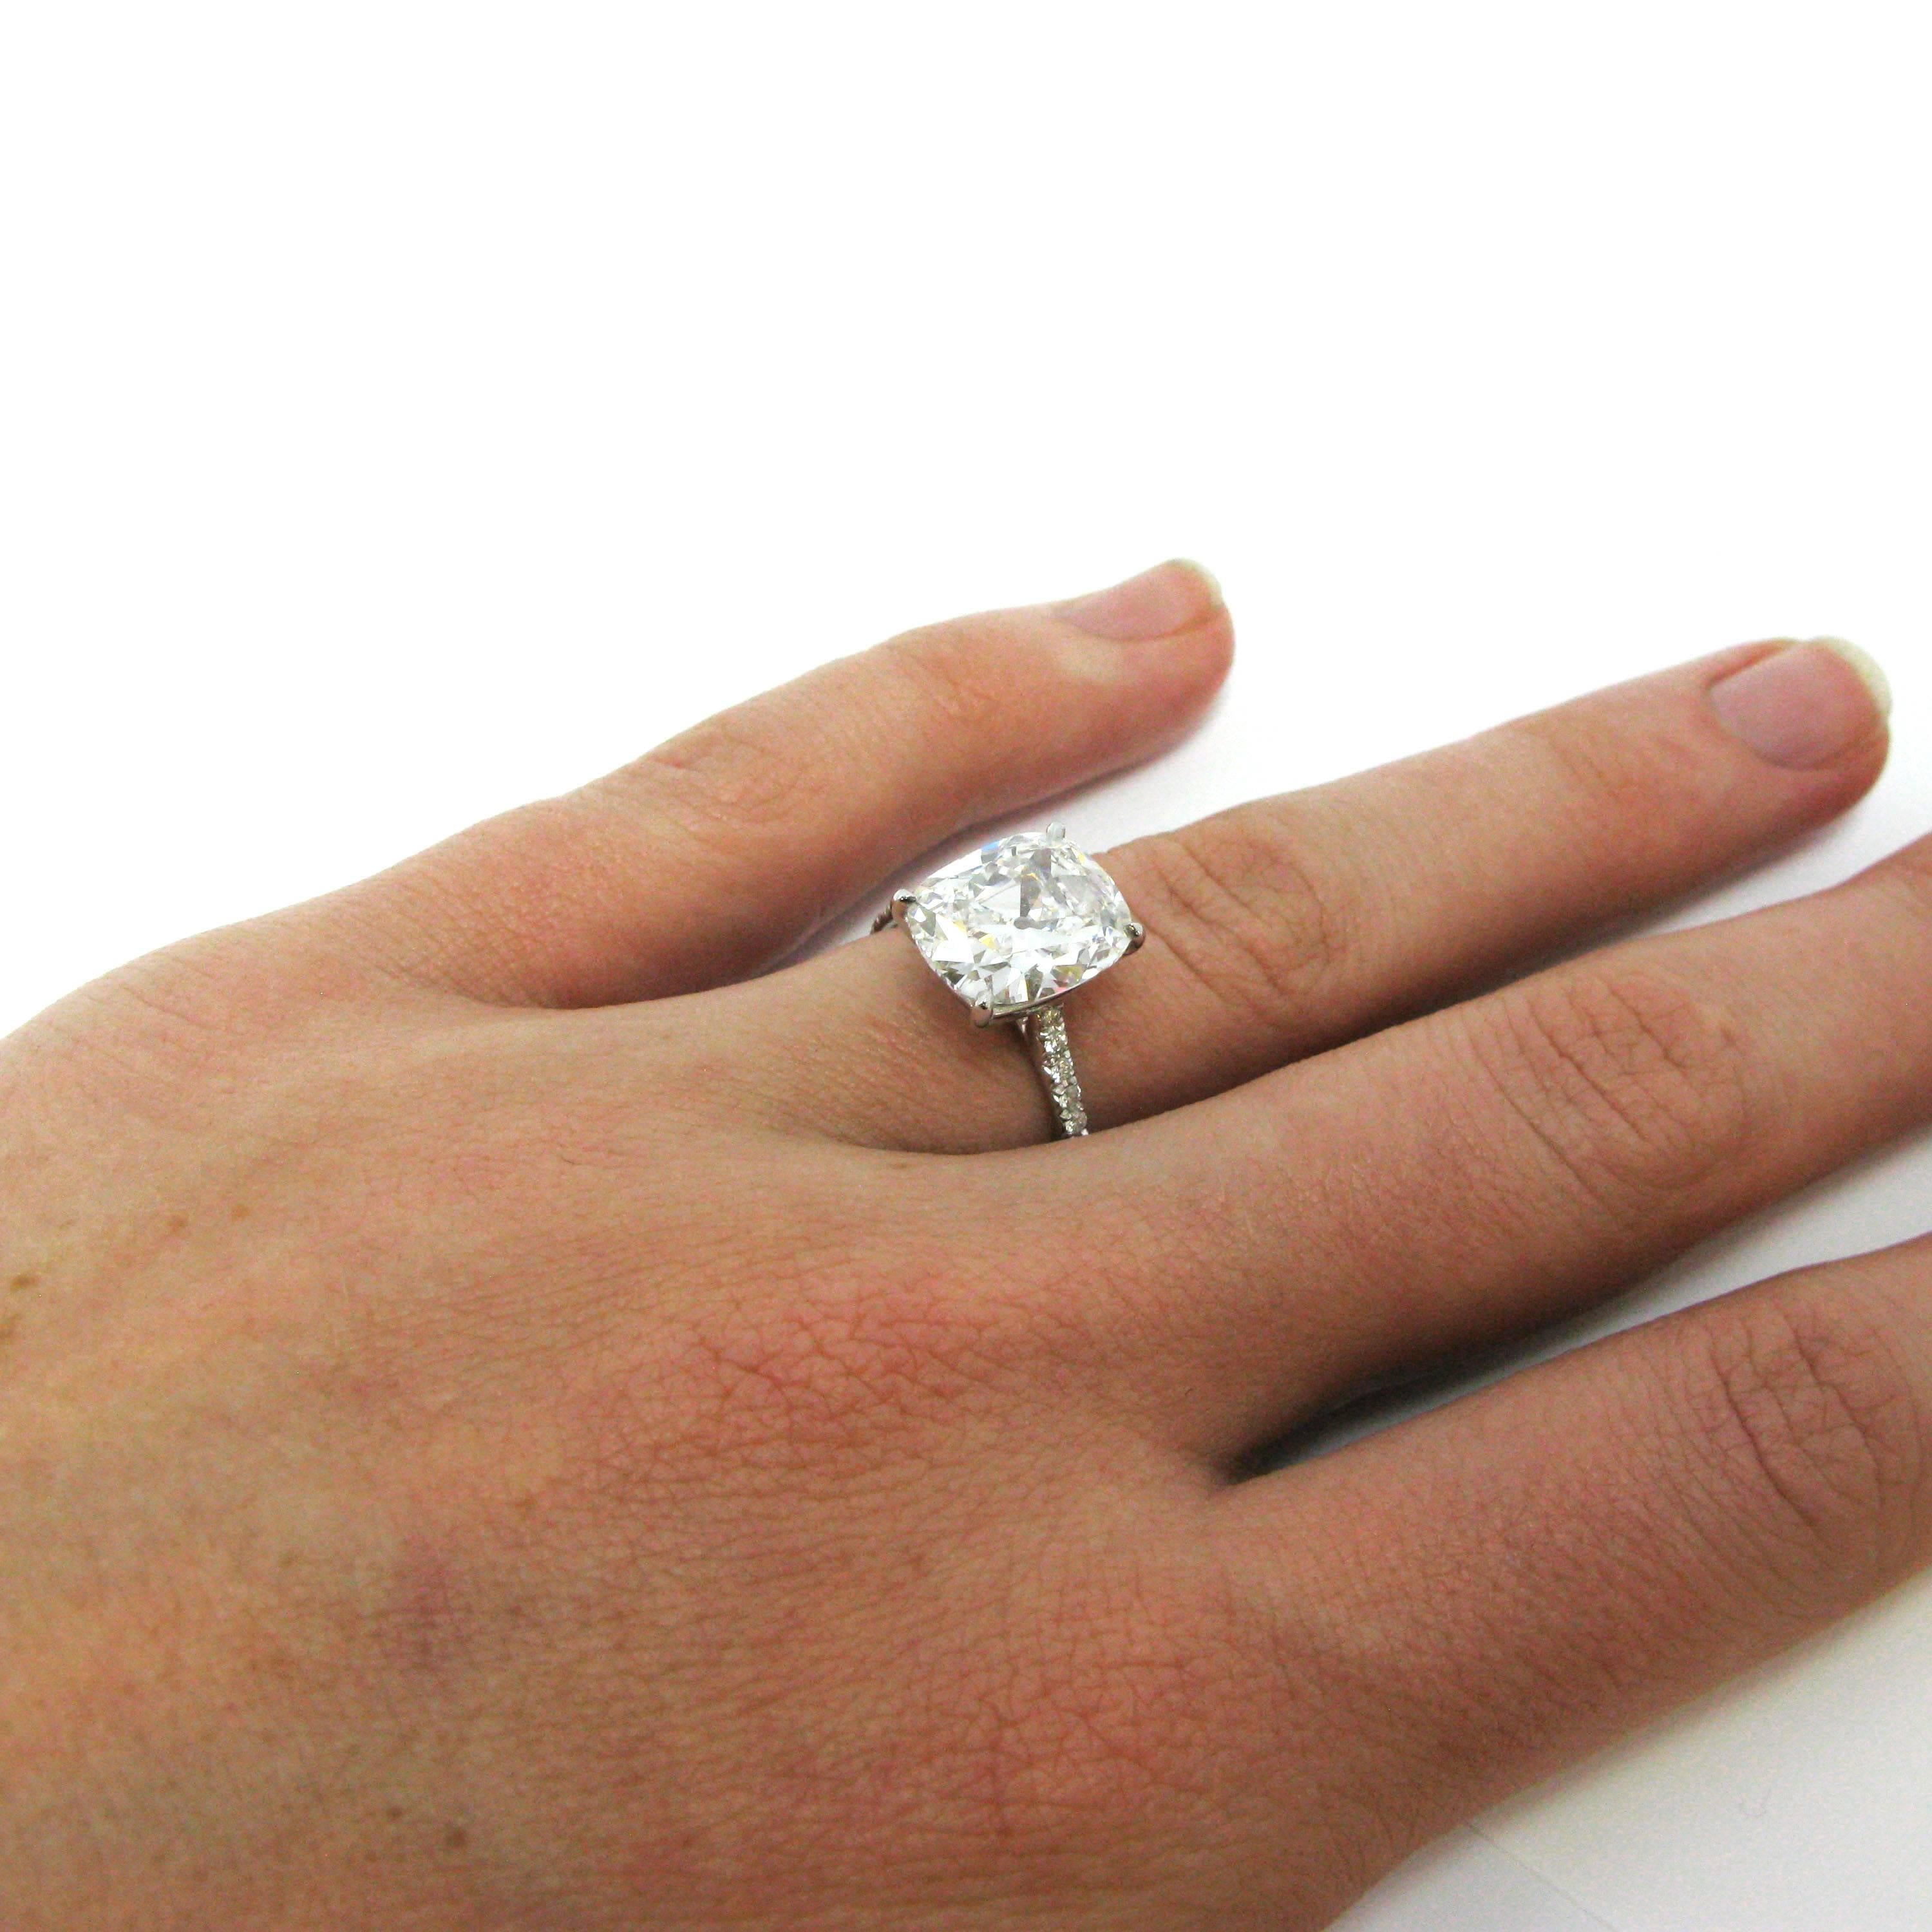 An elegant take on the classic solitaire engagement ring! A 4.15 carat cushion-cut diamond, with F color and VVS2 clarity, is prong-set into a simple platinum mounting set with 0.32 carat of pave diamonds down the sides of the ring shank. The large